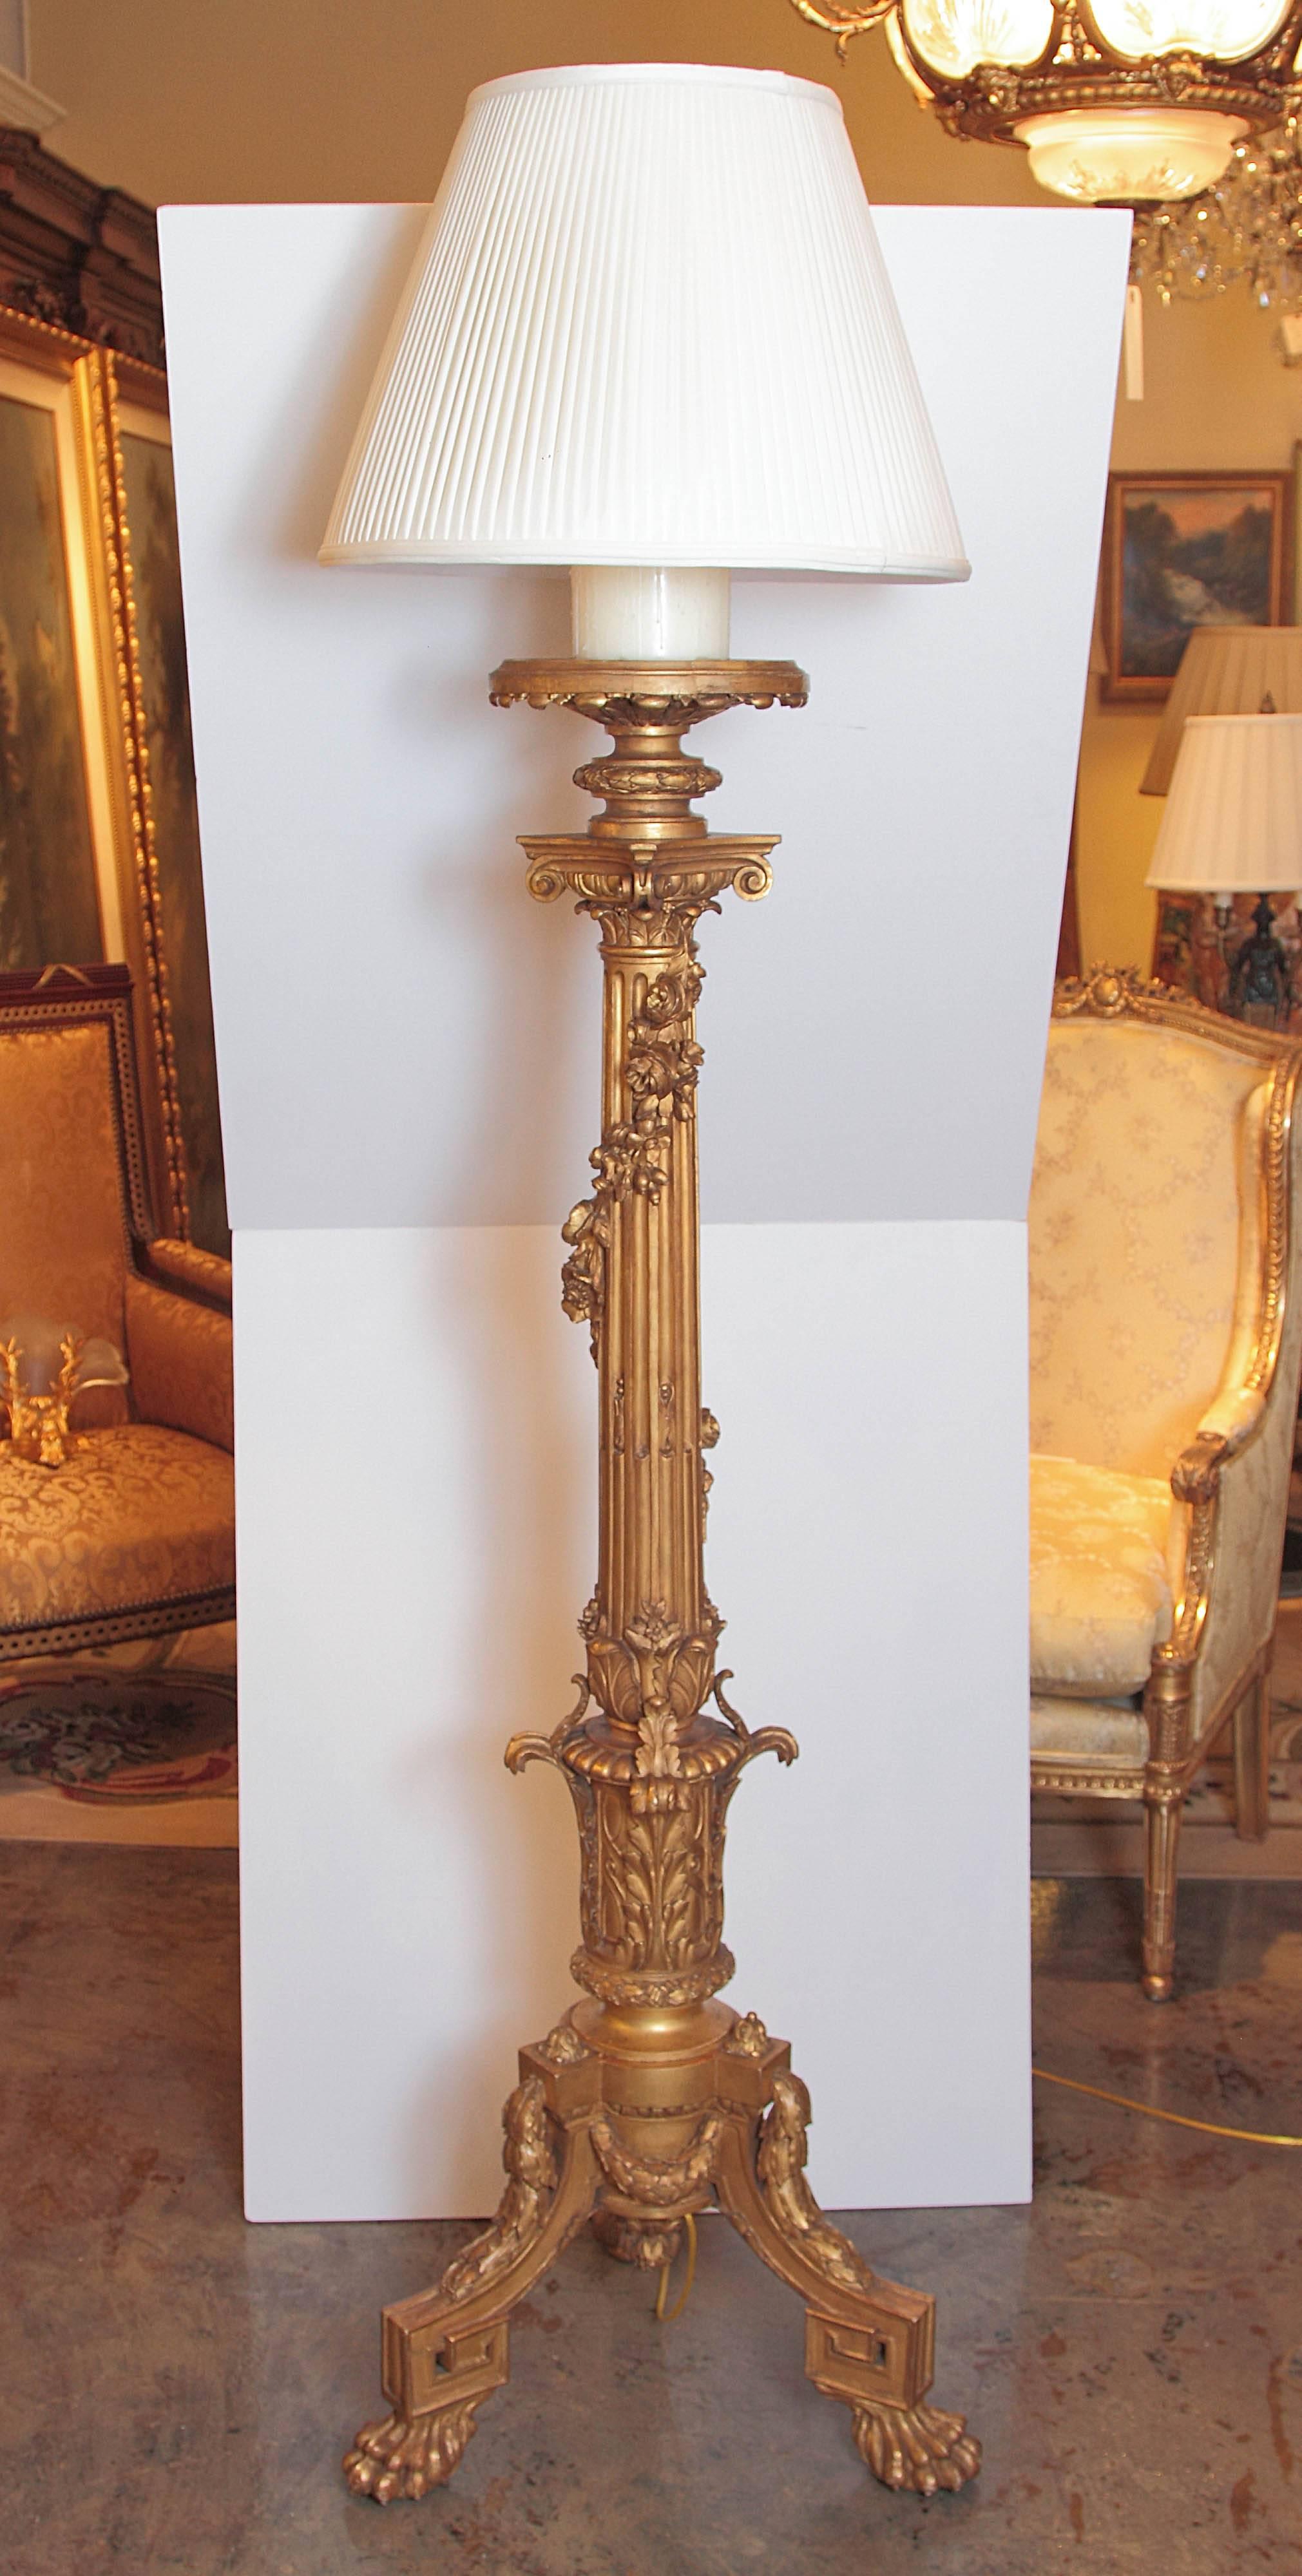 Pair of finely carved 19th century French gilt carved Regence torchieres made into floor lamps. Custom silk pleated shades.